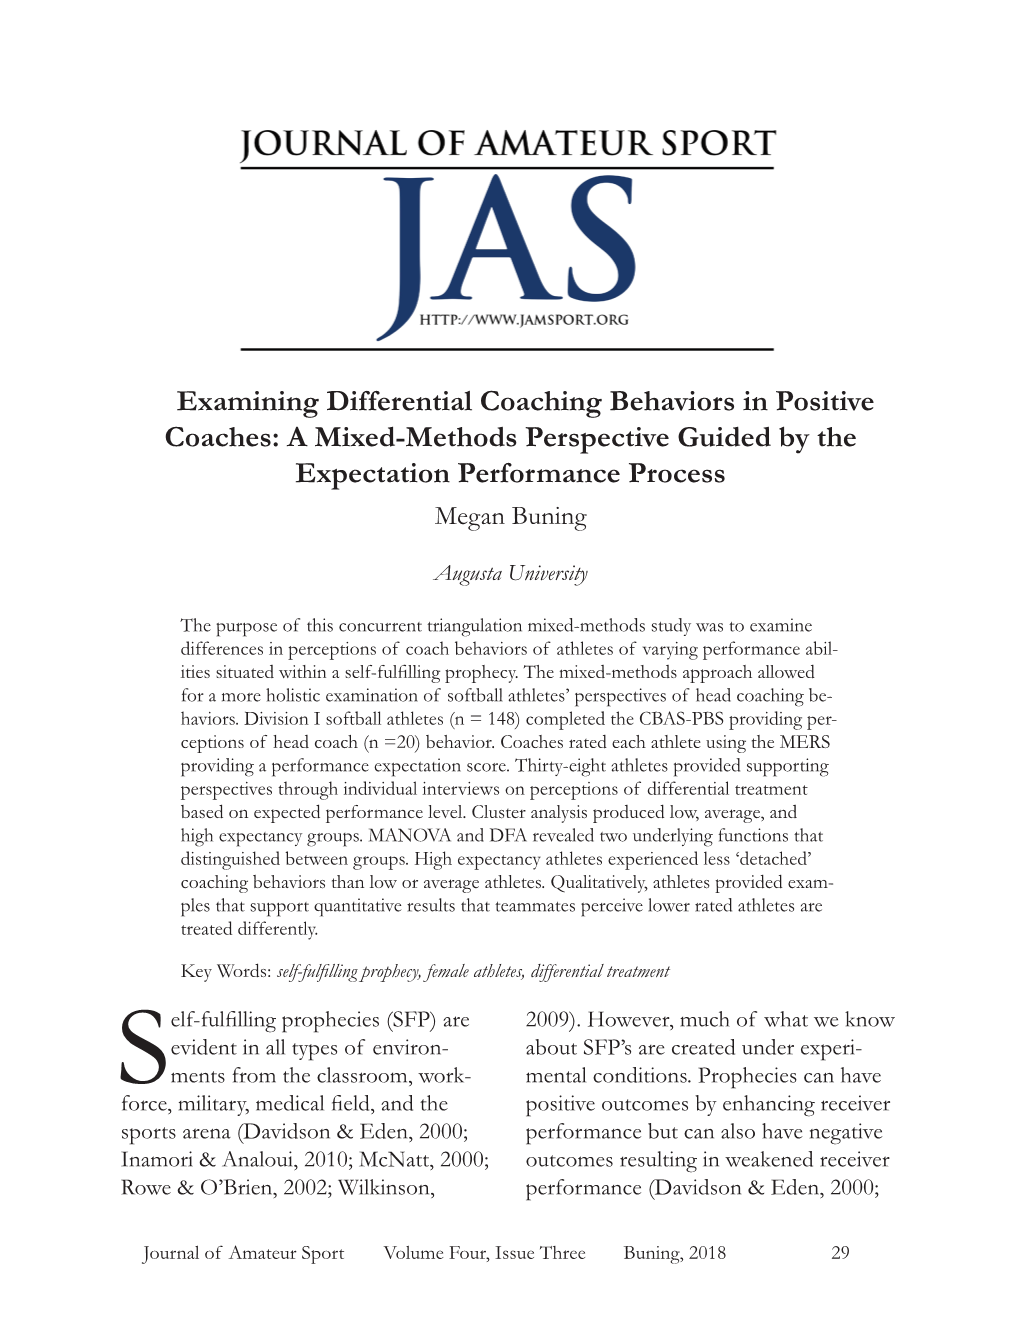 Examining Differential Coaching Behaviors in Positive Coaches: a Mixed-Methods Perspective Guided by the Expectation Performance Process Megan Buning